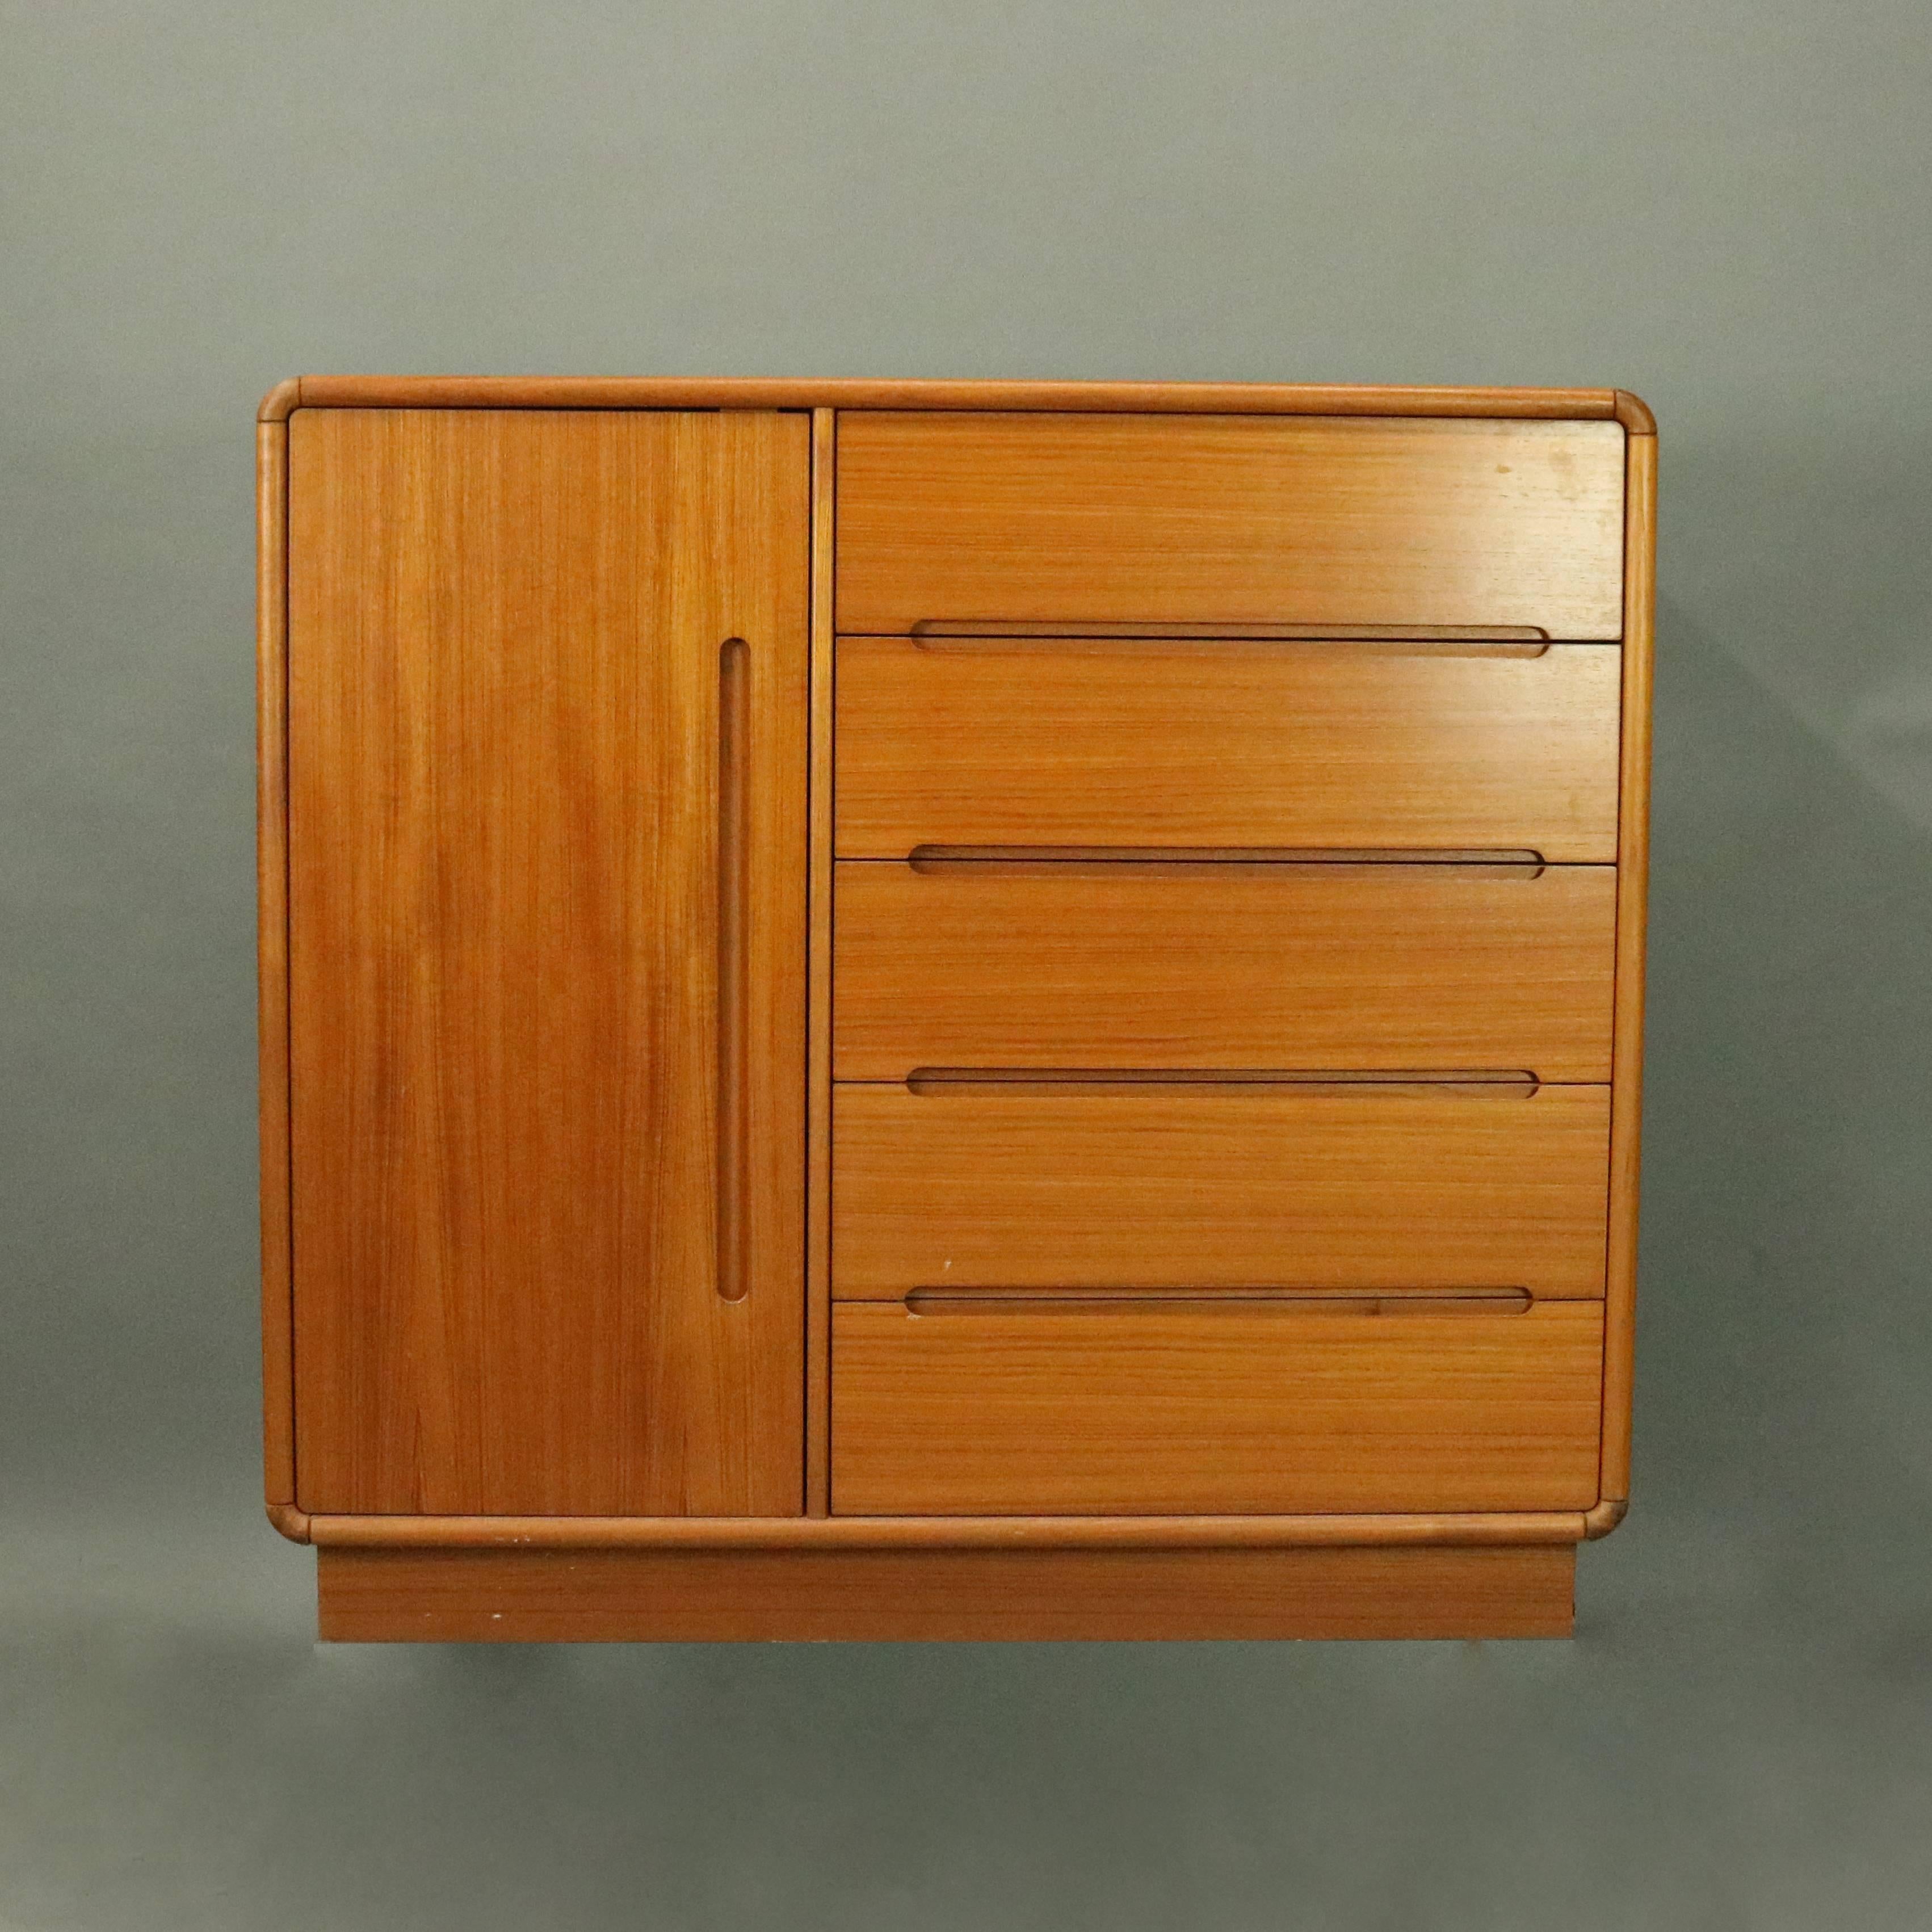 Pair of vintage Mid-Century Danish modern Heywood Wakefield School cabinets feature five outer drawers with side cabinet door revealing shelved interior with upper drawers, en verso label reads Sun Cabinet Co., LTD, Made in Thailand, circa